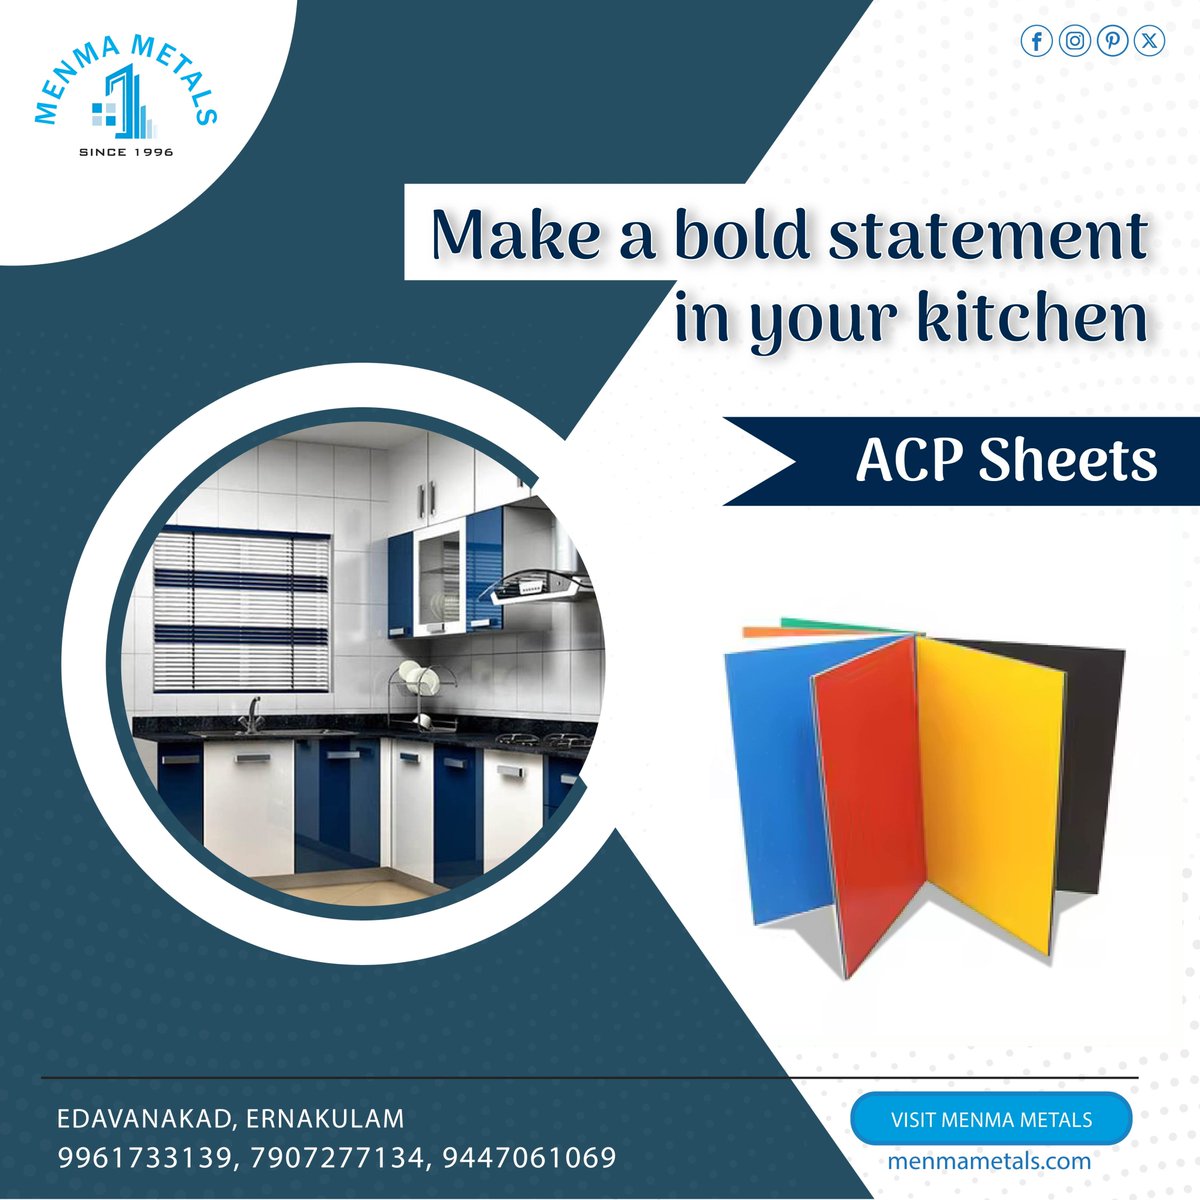 We  ensure that all our ACP sheets adhere to industry standards,  guaranteeing reliability and performance. 

#menmametals
.
.
#ACPSheets #CommercialDesign #interior #exterior #aluminiumcompositepanel #acp #acpdealer #edavanakad #ernakulam